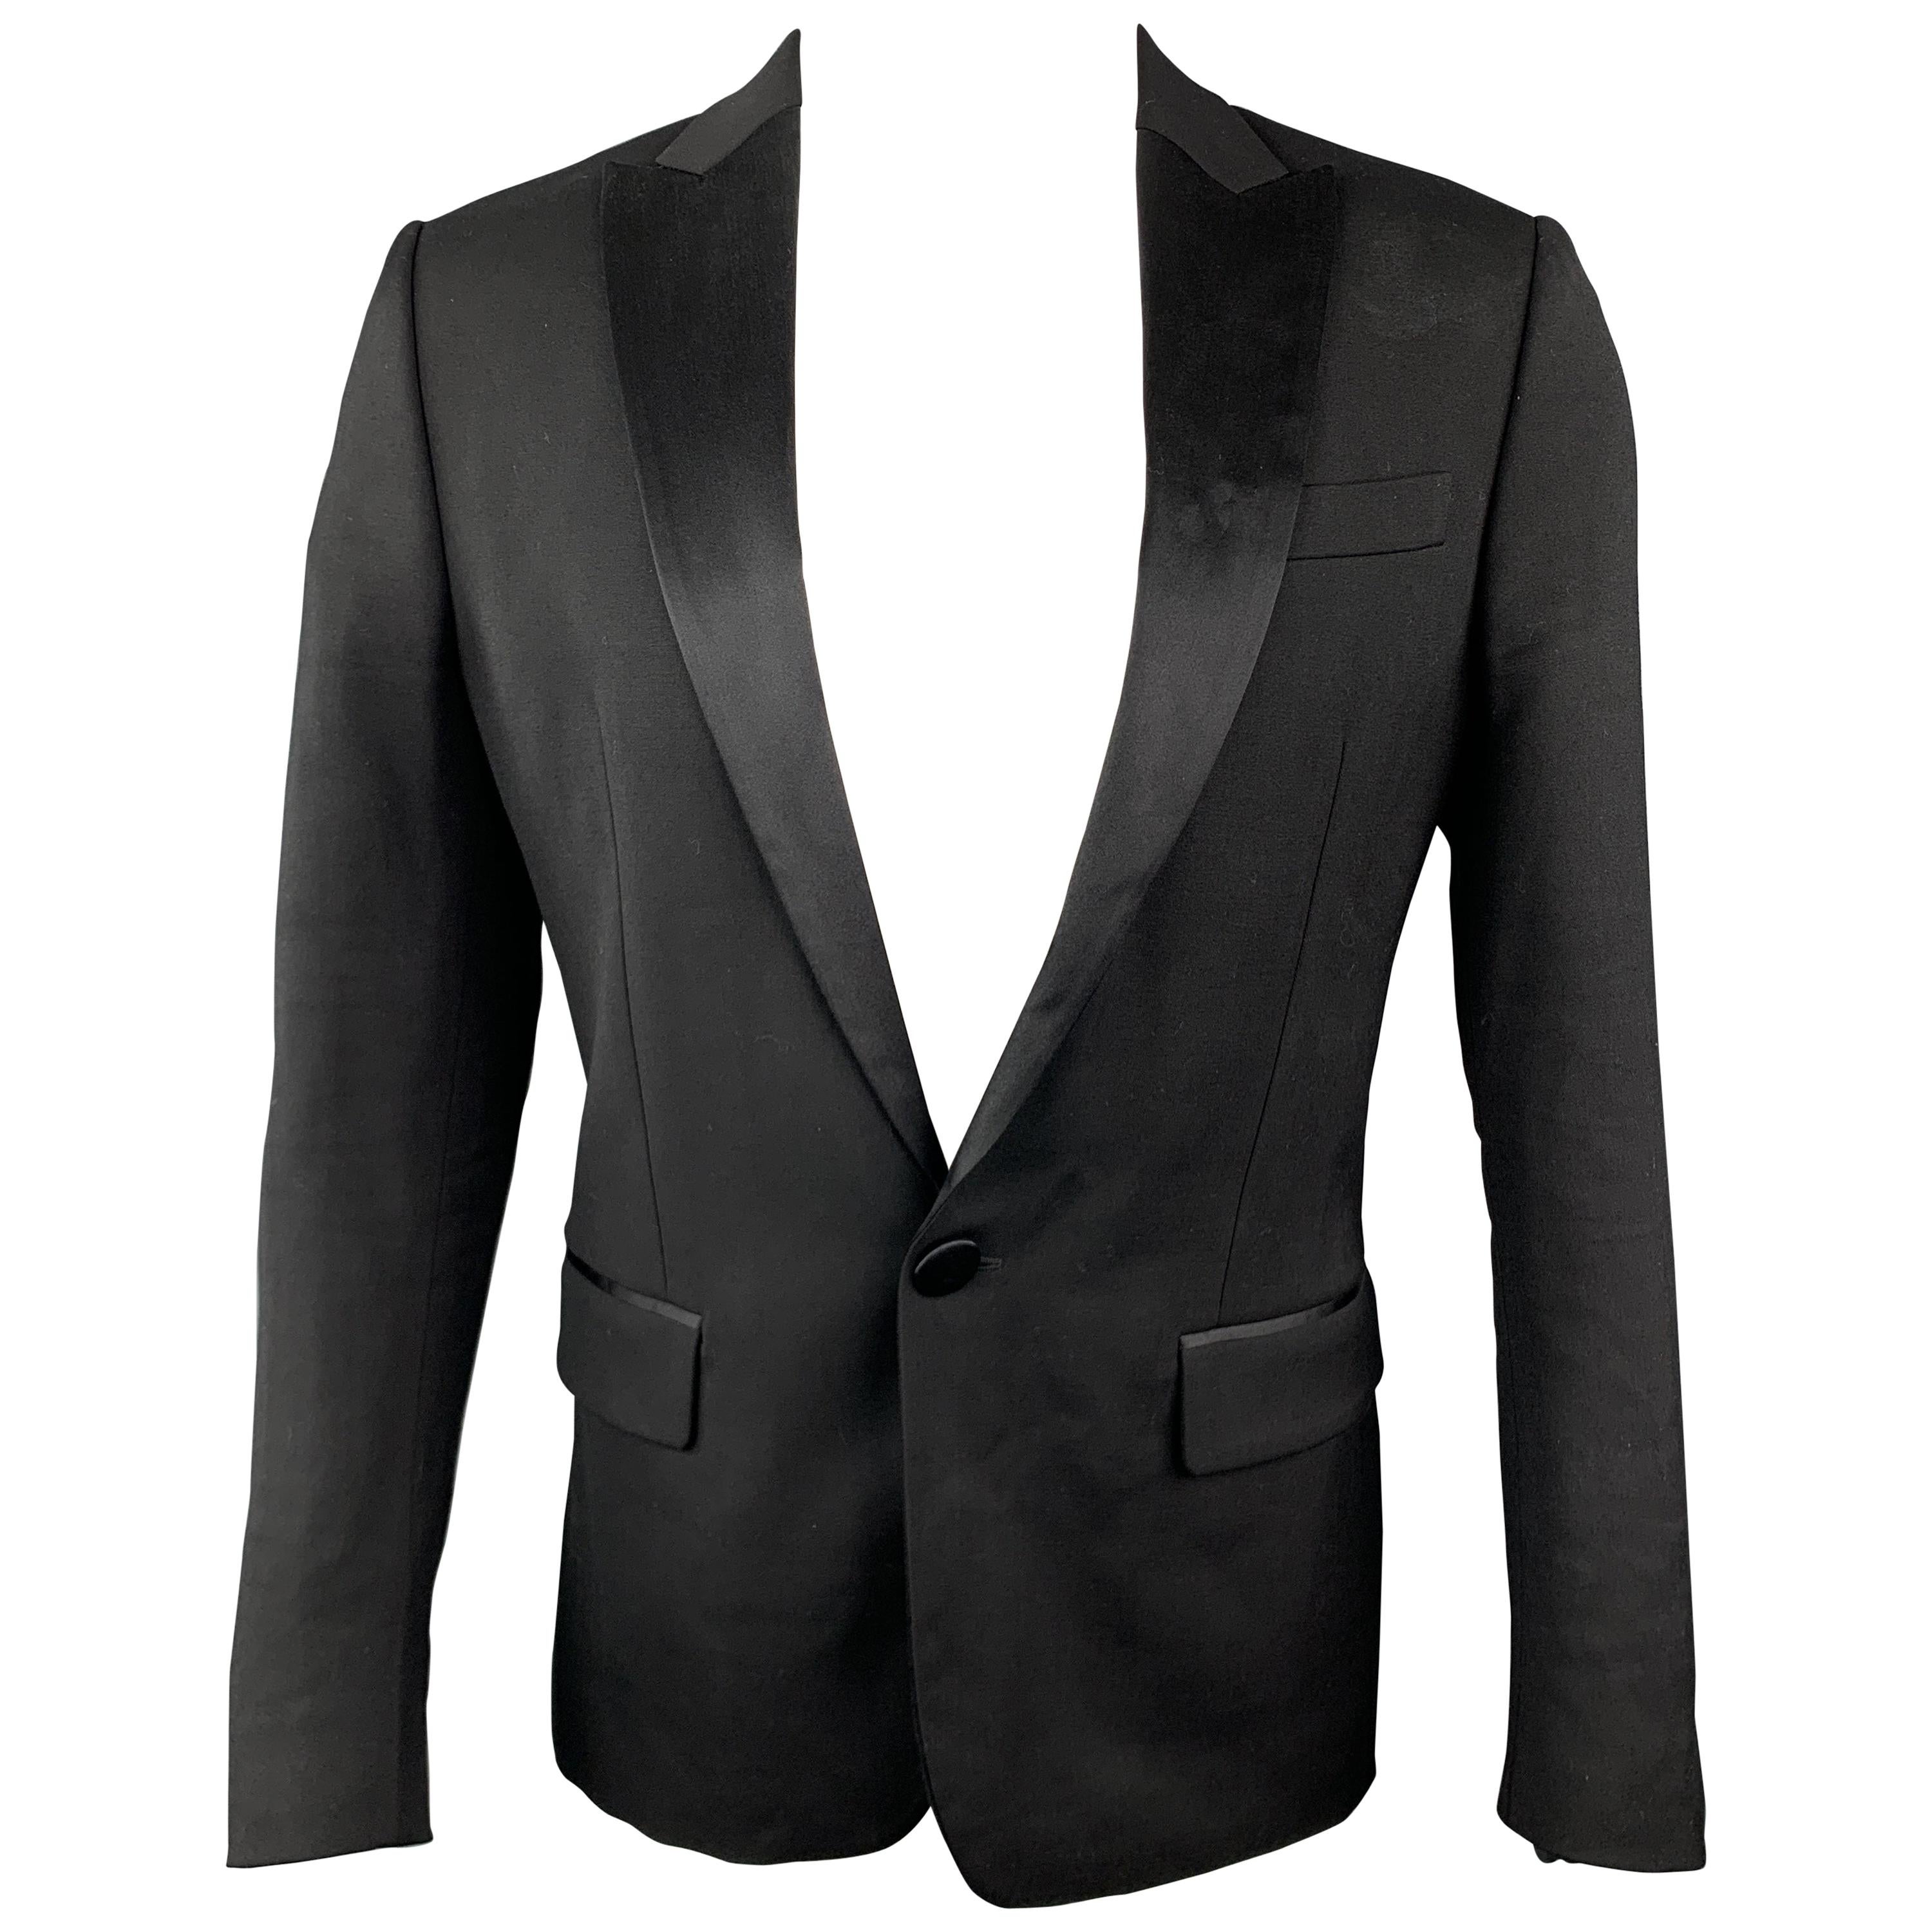 DSquared2 Jacket Tuxedo Bugle Beads Superb Rear Detail 44 For Sale at ...